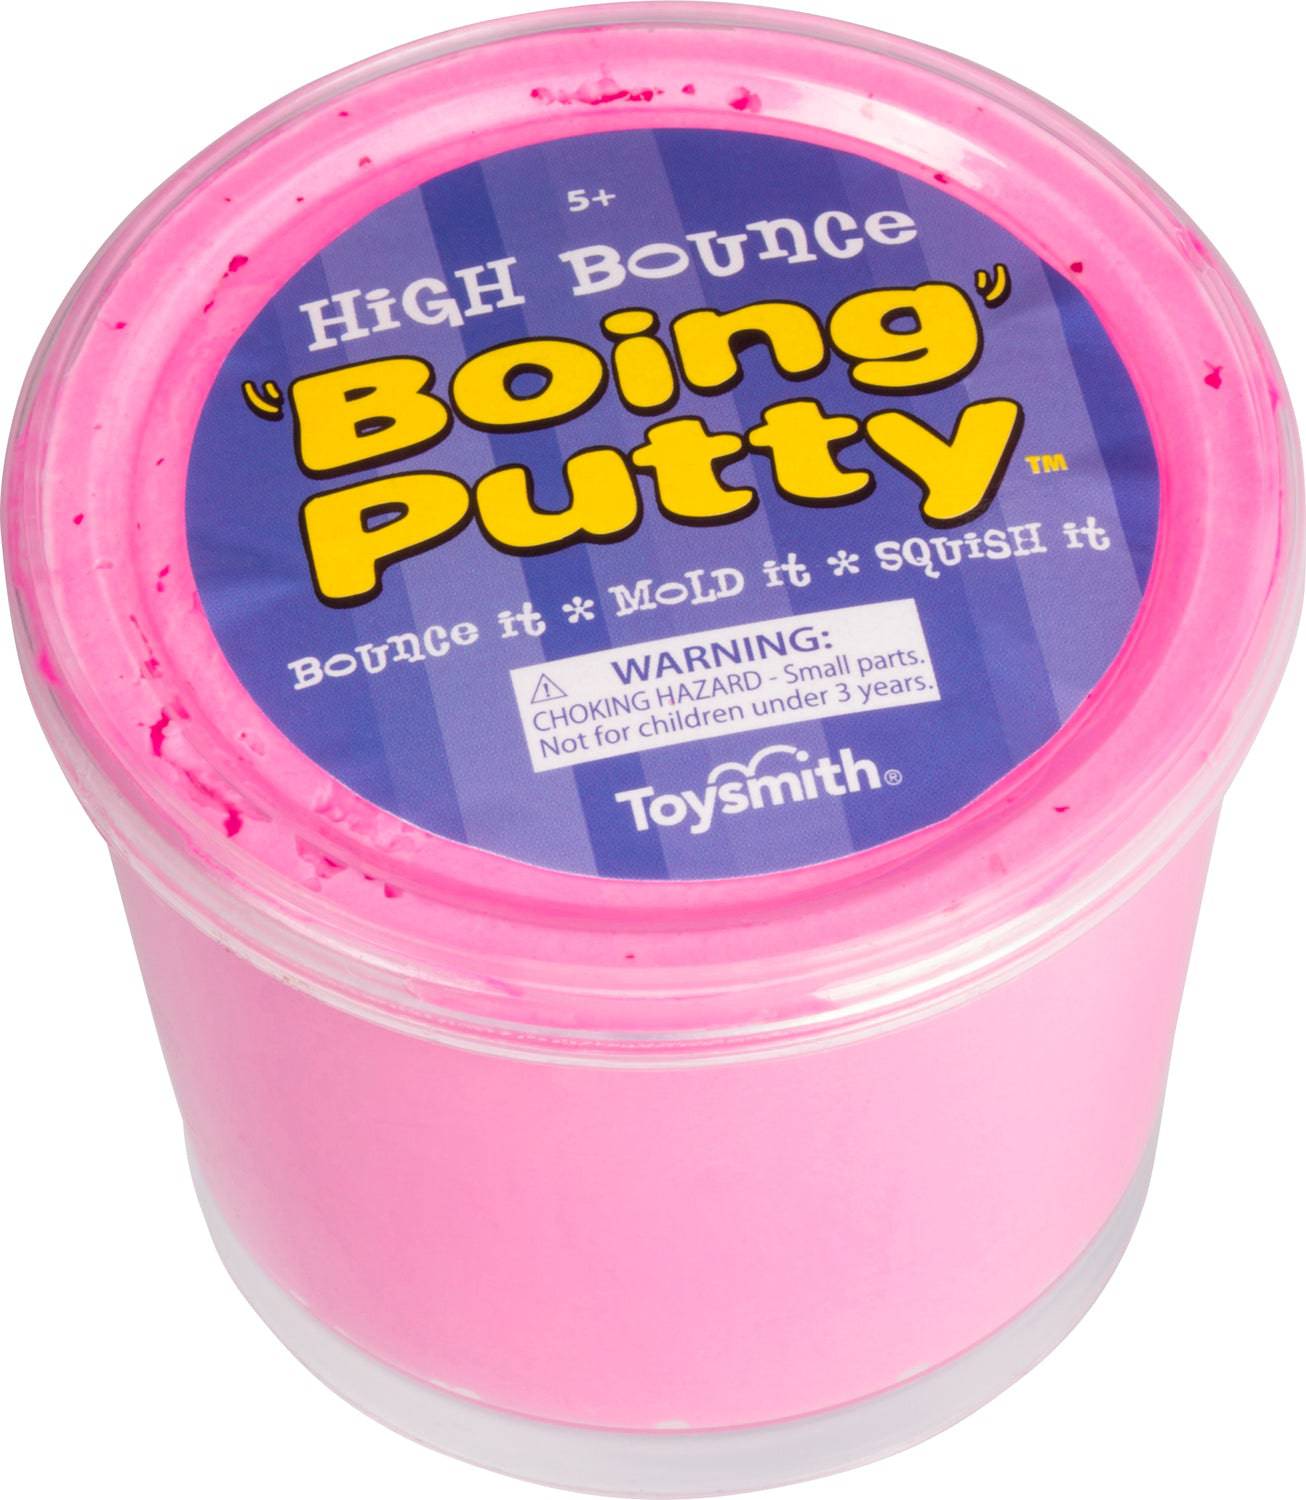 High Bounce Boing Putty - A Child's Delight